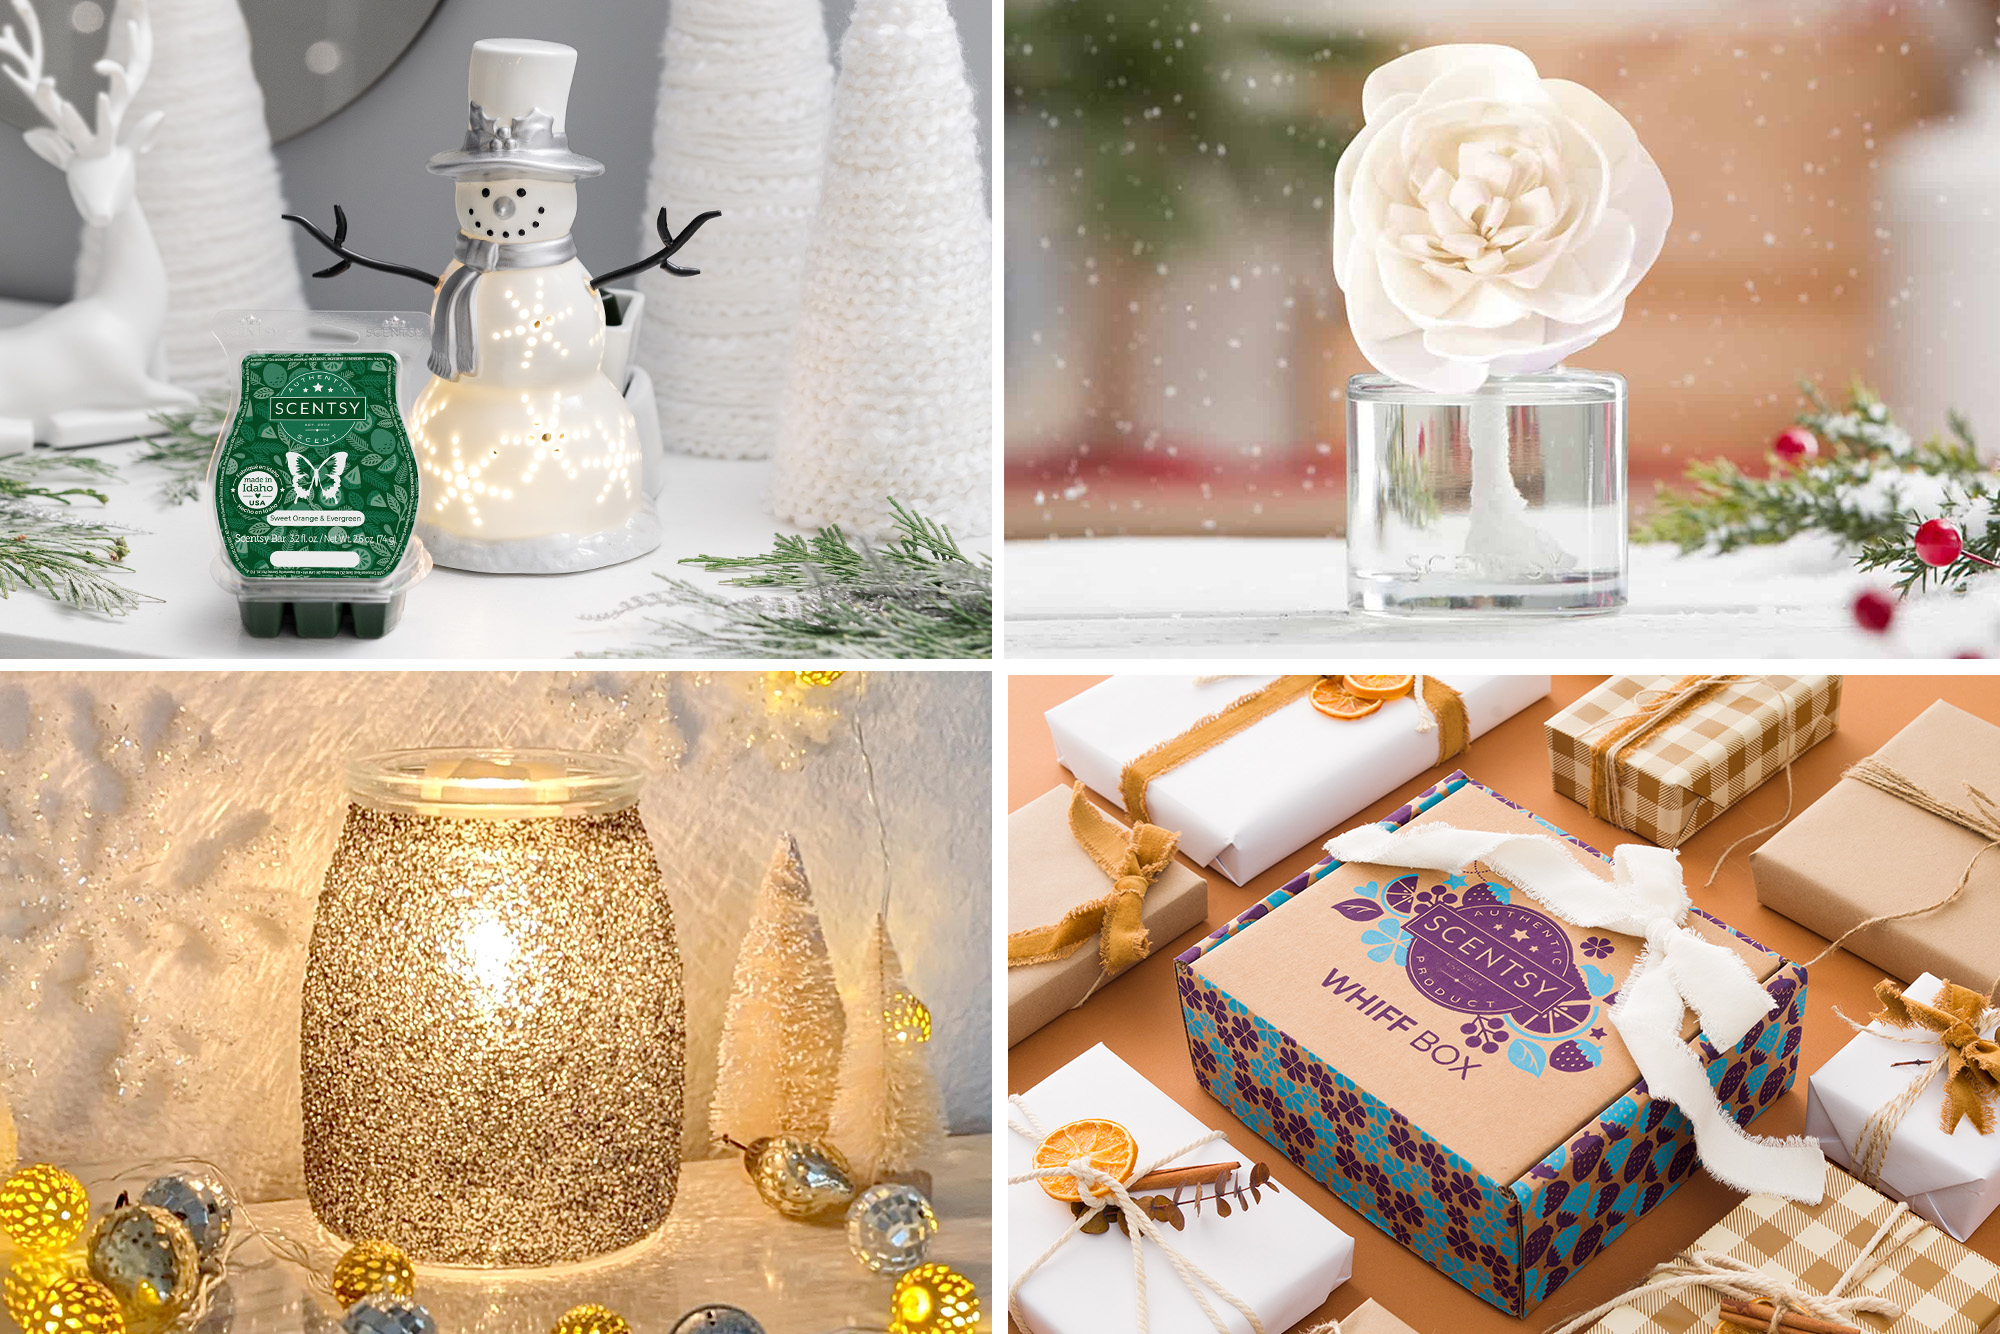 The Sparkling Snowman Warmer with Sweet Orange & Evergreen wax bar, a seasonally scented Fragrance Flower, the Twinkle Wax Warmer and a Whiff Box full of trending Scentsy products!